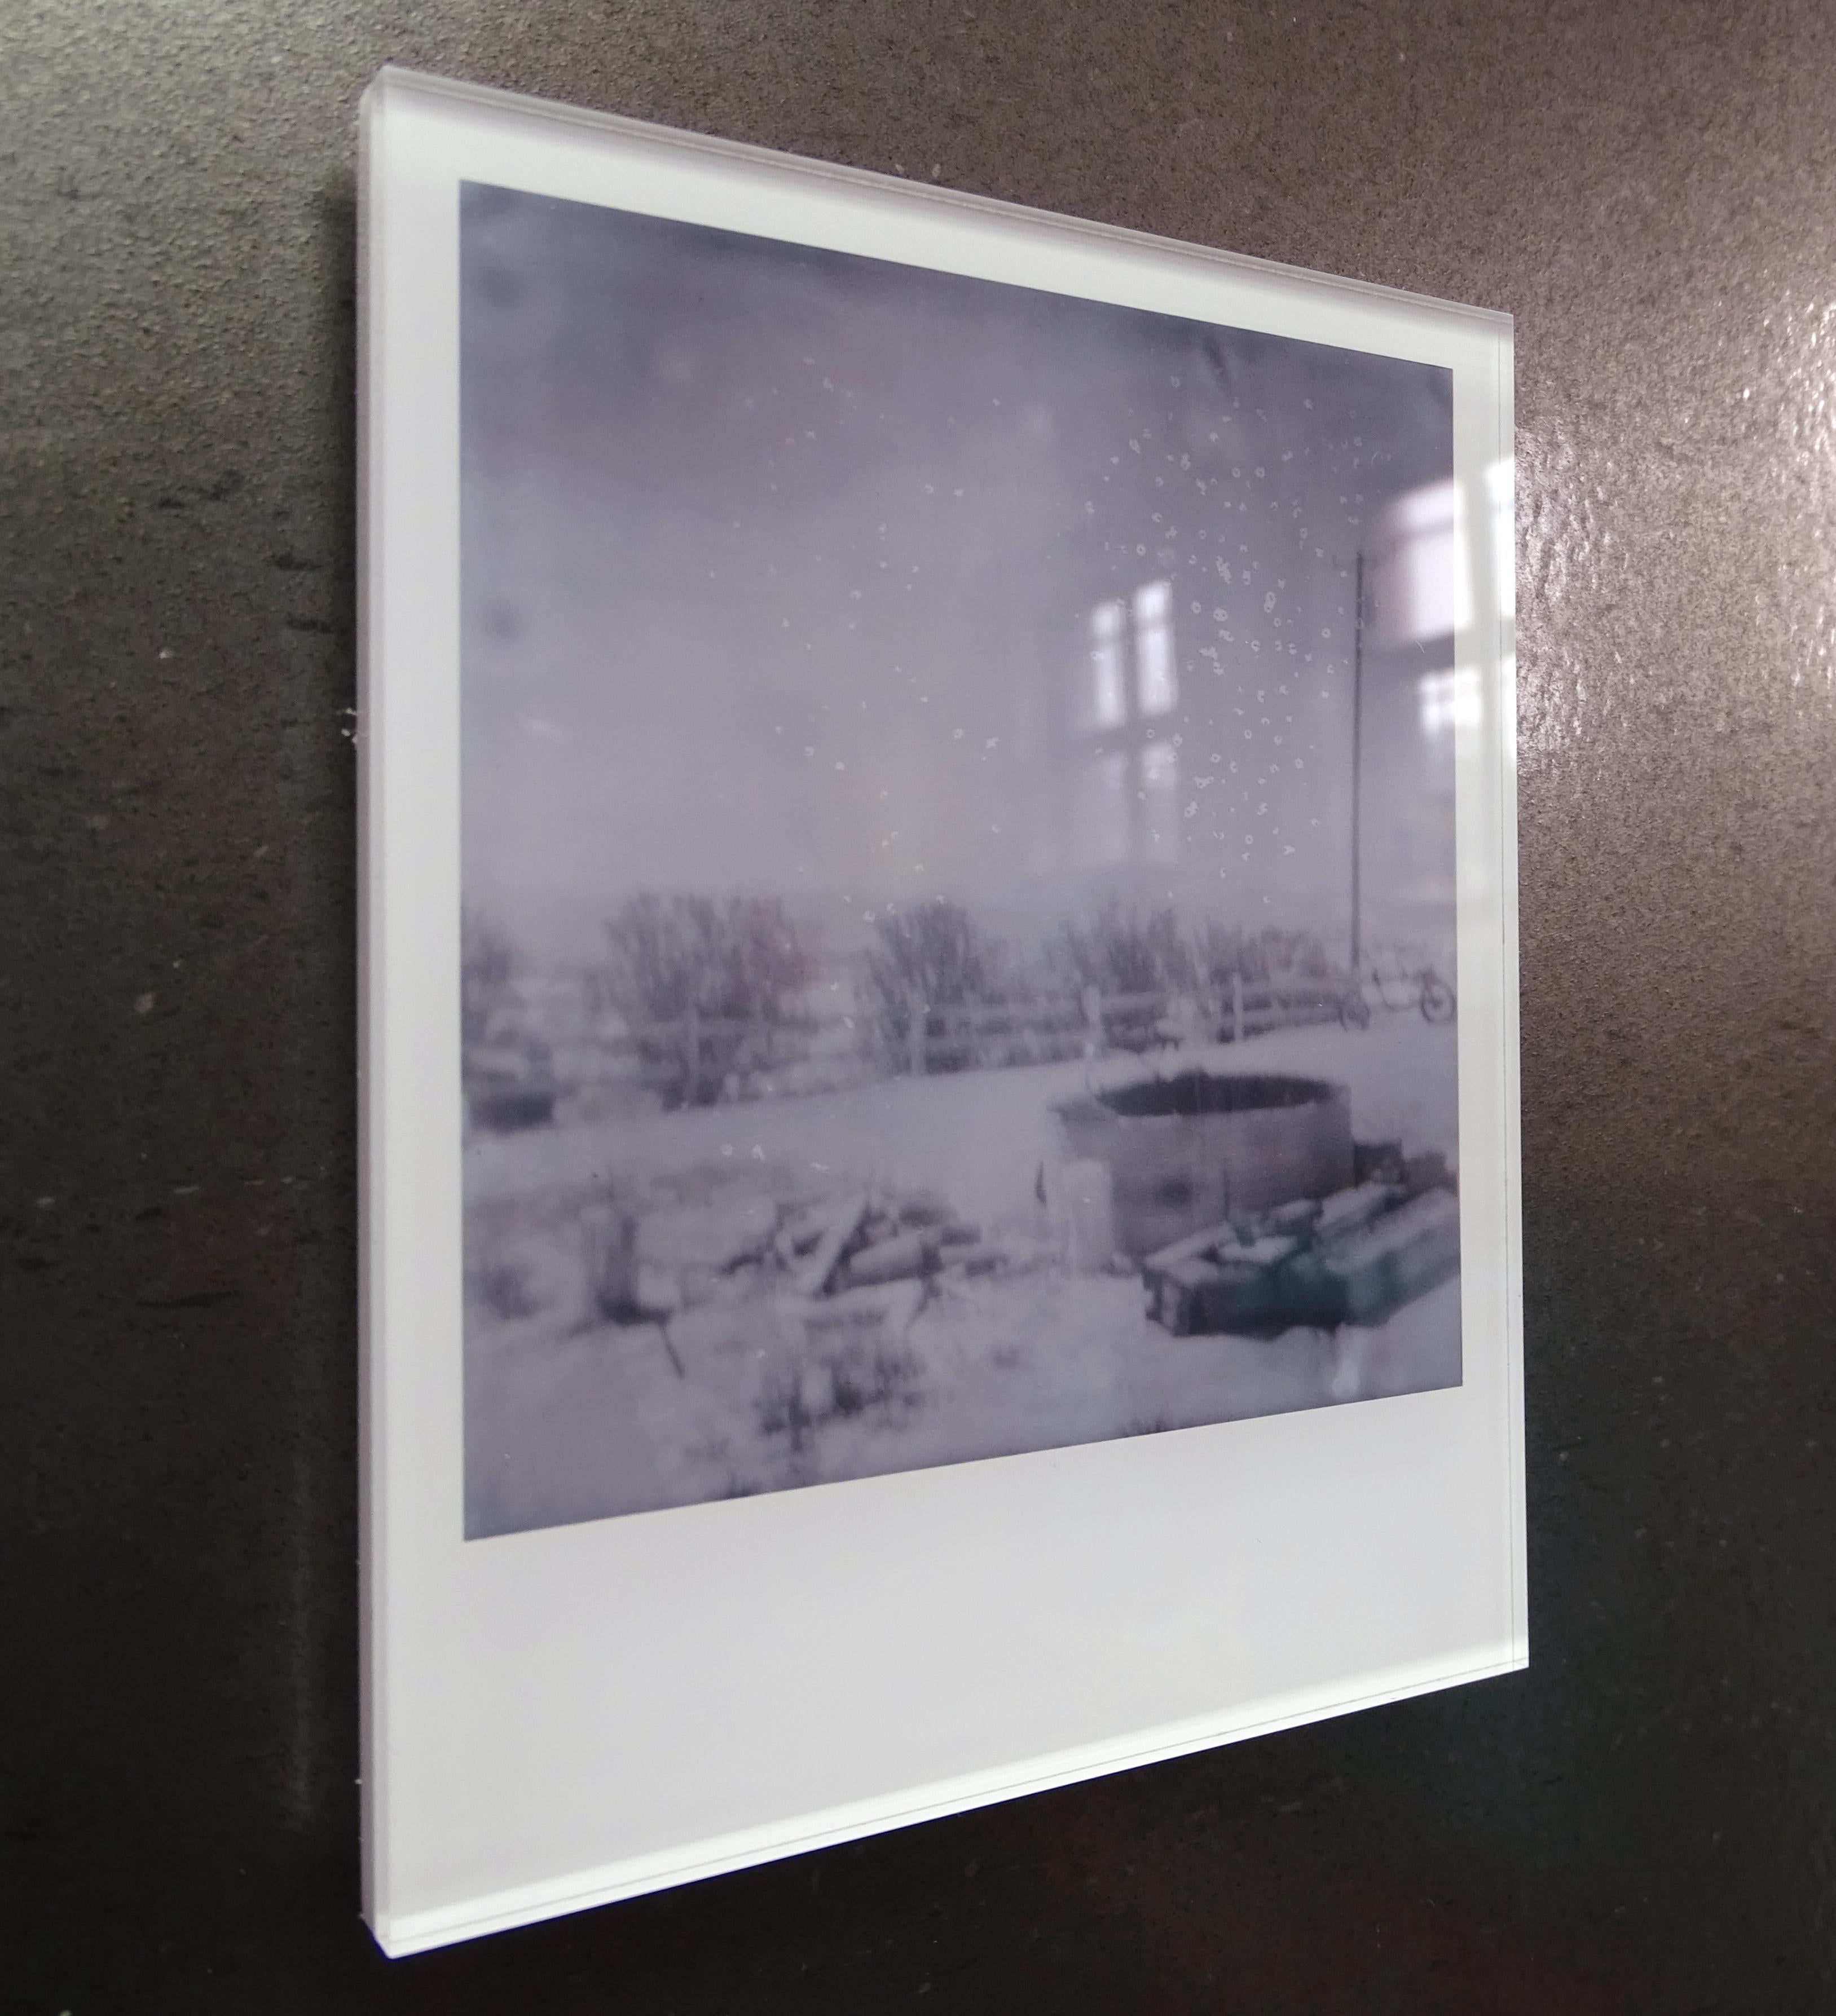 Stefanie Schneider's Minis
Summer Snow (Sidewinder), 2005

Signed and signature brand on verso.
Lambda digital Color Photographs based on a Polaroid.
Sandwiched in between Plexiglass (thickness 0.7cm)

Polaroid sized open Editions 1999-2013
10.7 x